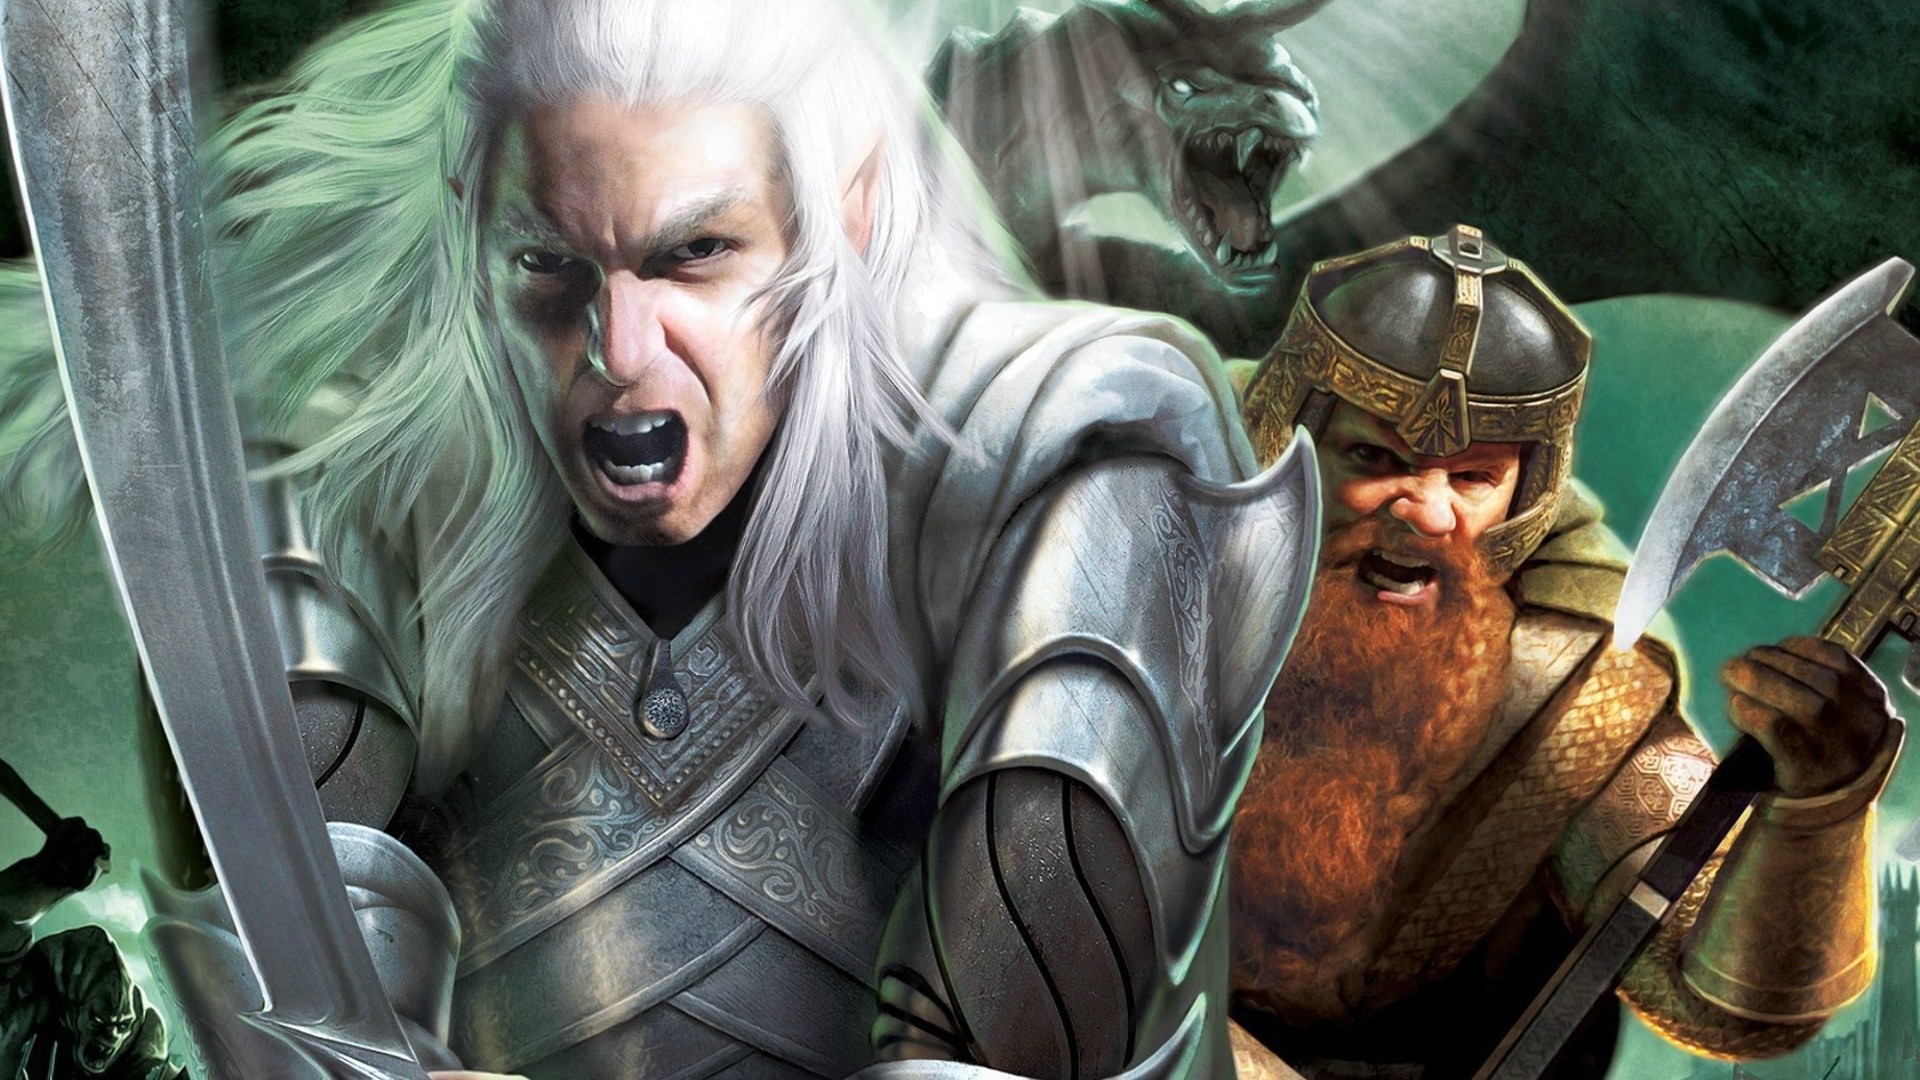 [16+] Прохождение The Lord of the Rings: The Battle for Middle-earth II. Эпизод 1